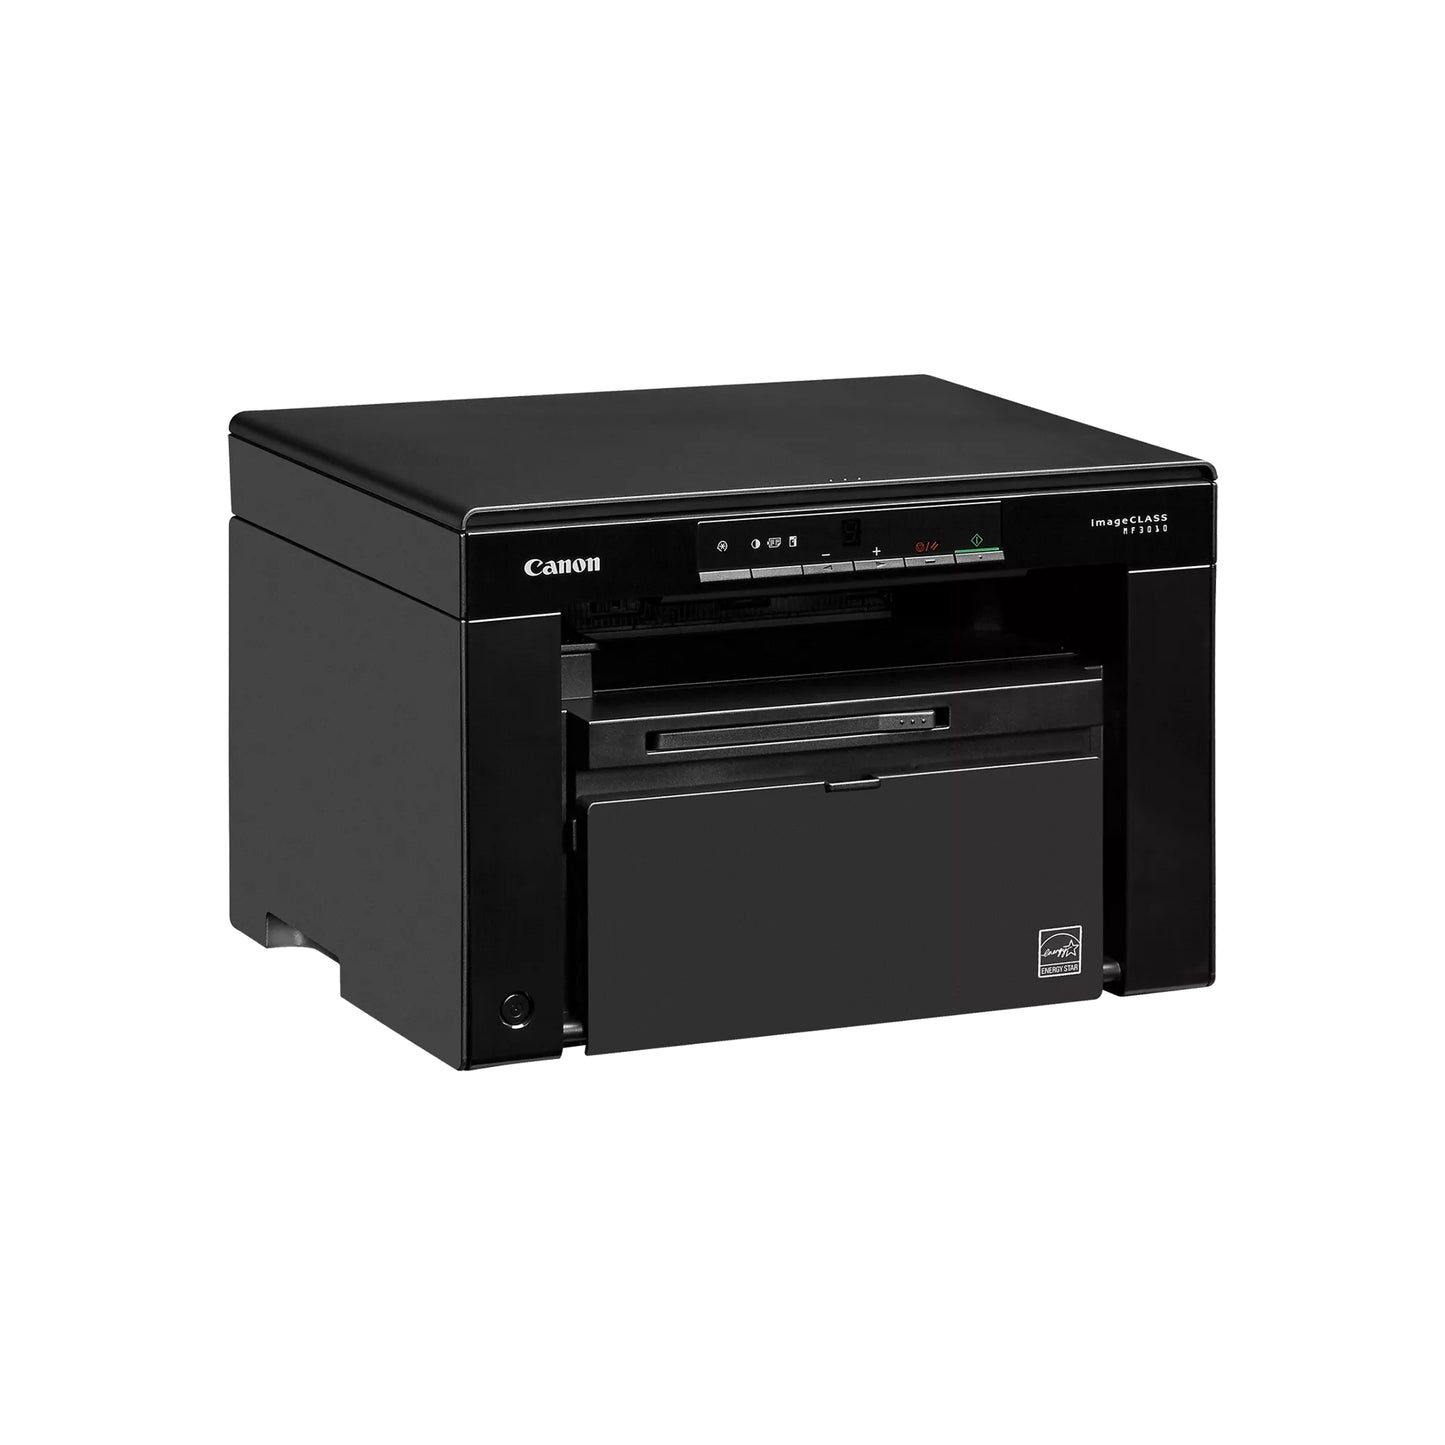 Canon imageCLASS MF3010 VP Wired Monochrome Laser Printer with Scanner, USB Cable included, Black